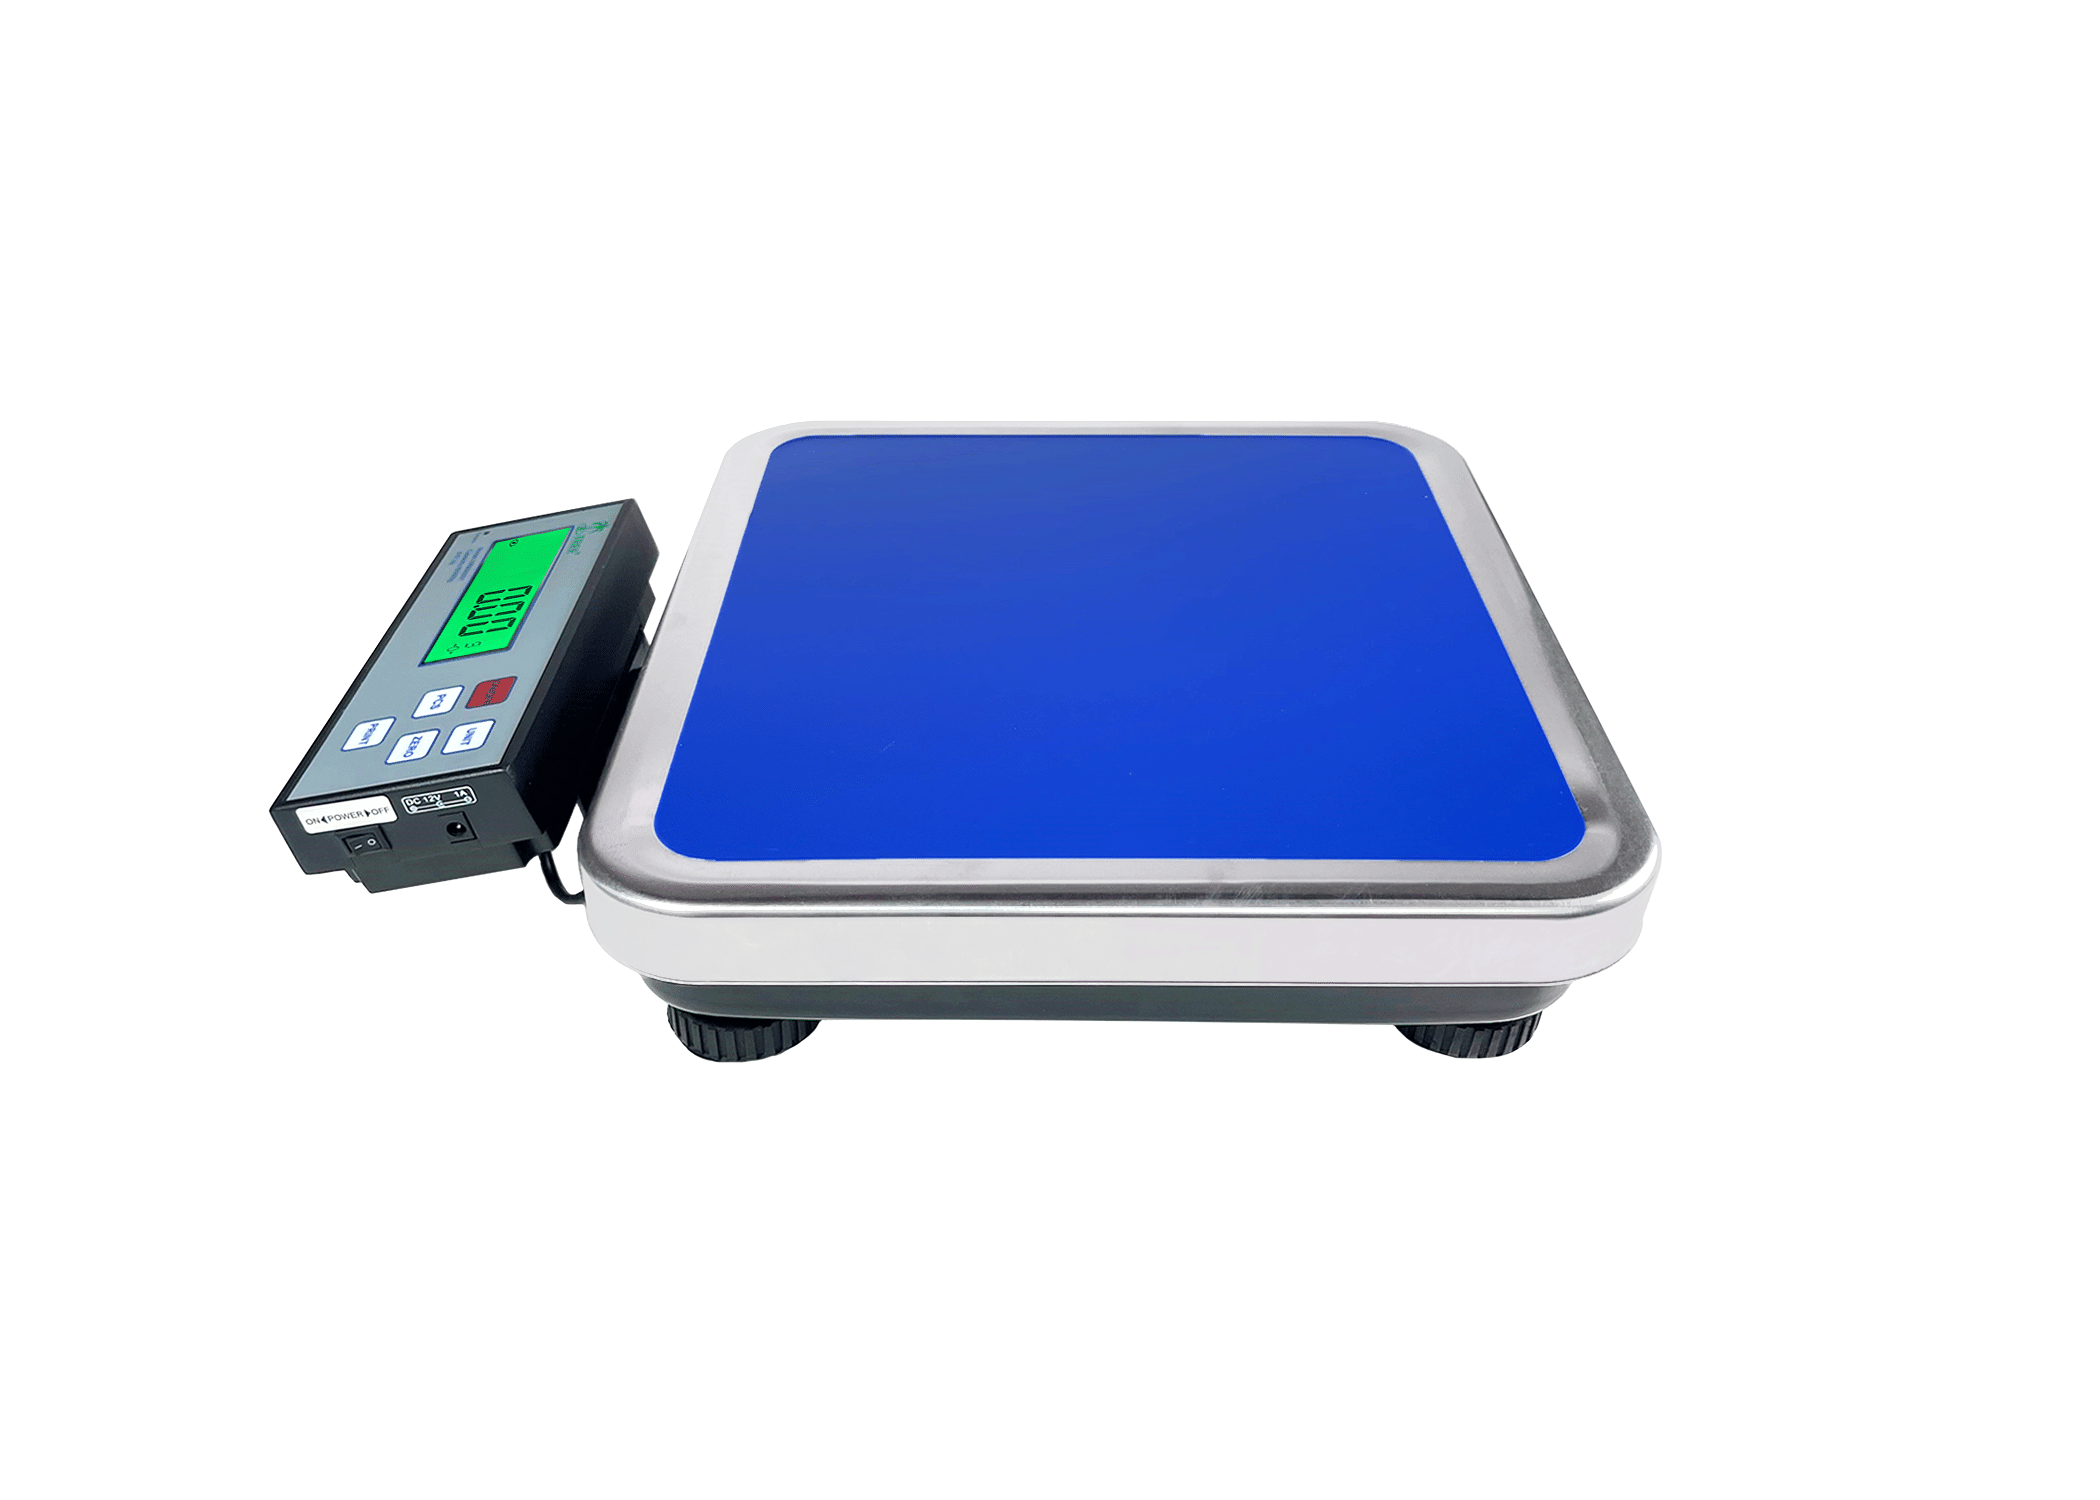 LW Measurements HRB-XG 10001 Precision Balance 1000 g x 0.1 g - Scale  Warehouse and More